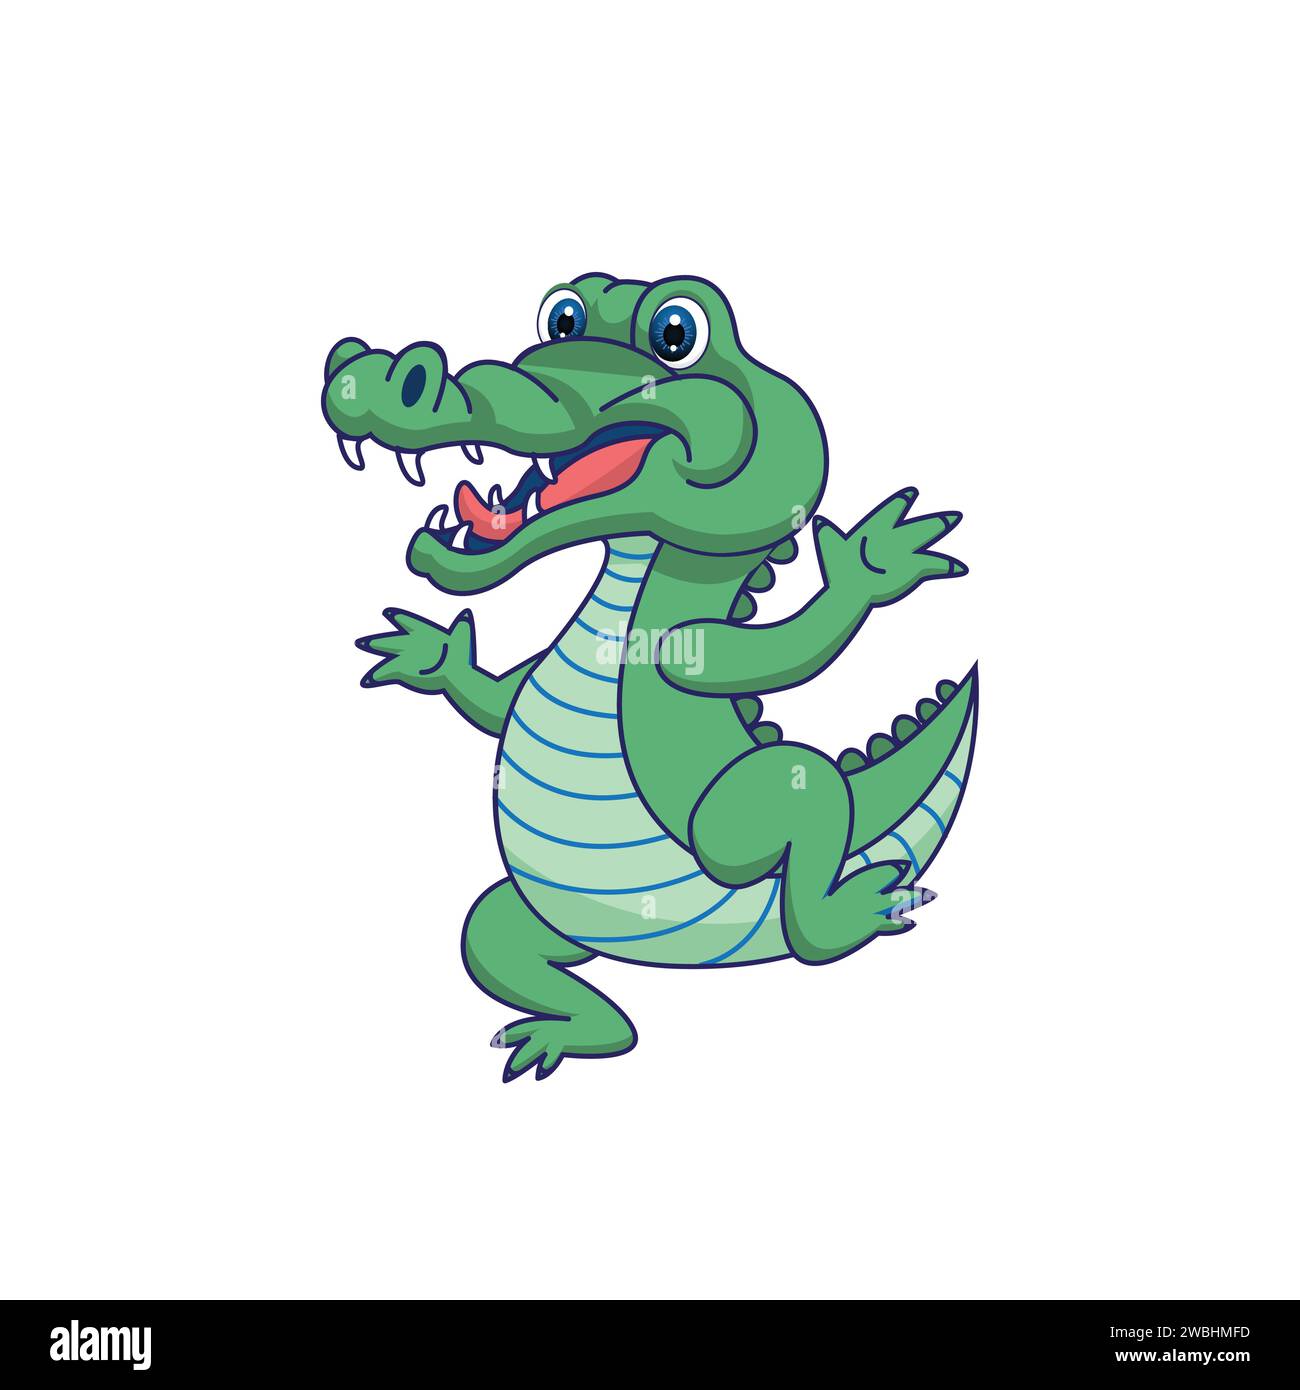 Cute Alligator or Crocodile in cartoon style isolated on white background vector illustration Stock Vector